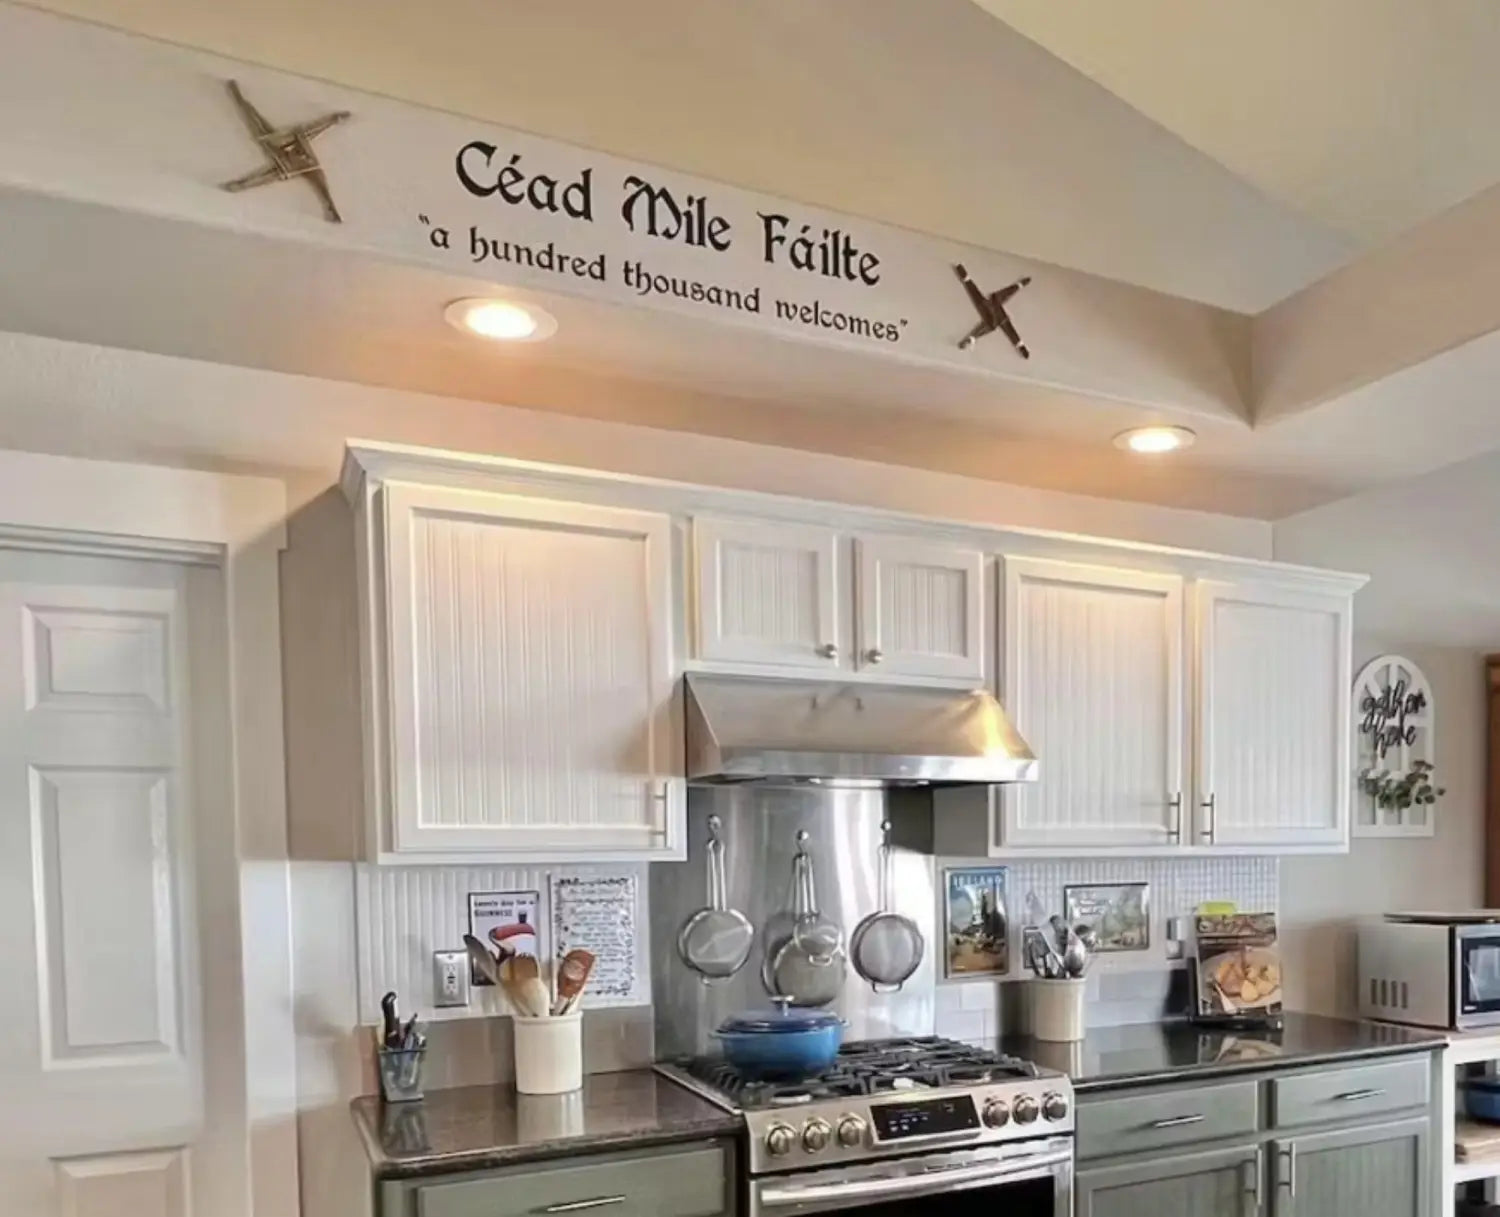 A beautiful wall decal submitted by a lucky customer who won our Wall of Fame contest for the month of March - Beautiful kitchen with wall quote decal that reads Cead Mile Failte 